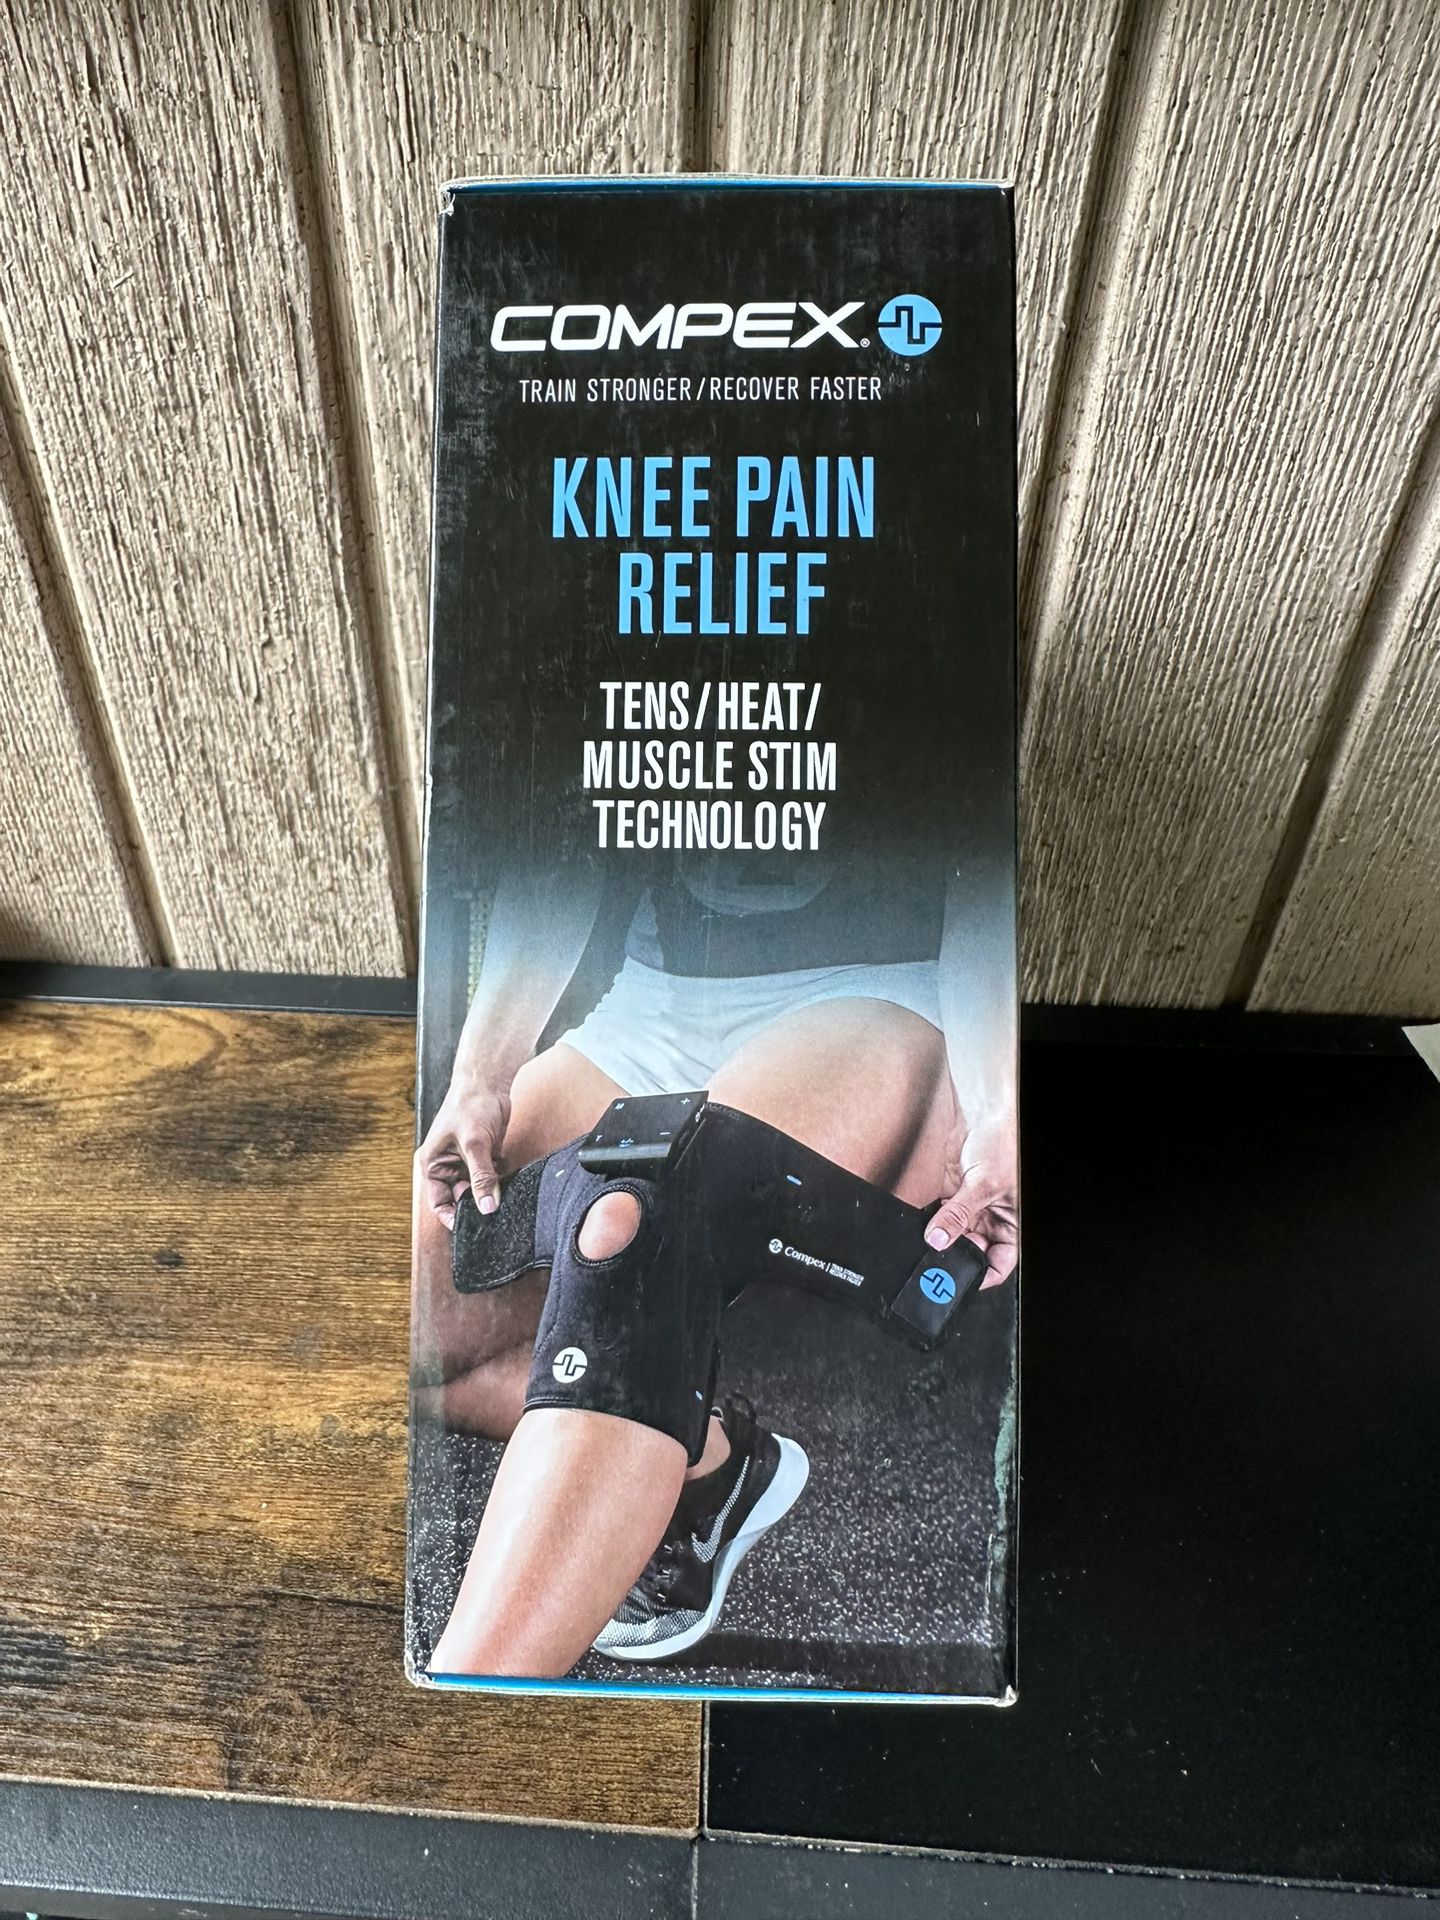 Heated Knee Wrap Compex for Pain Relief with TENS Unit / Muscle Stim Tech